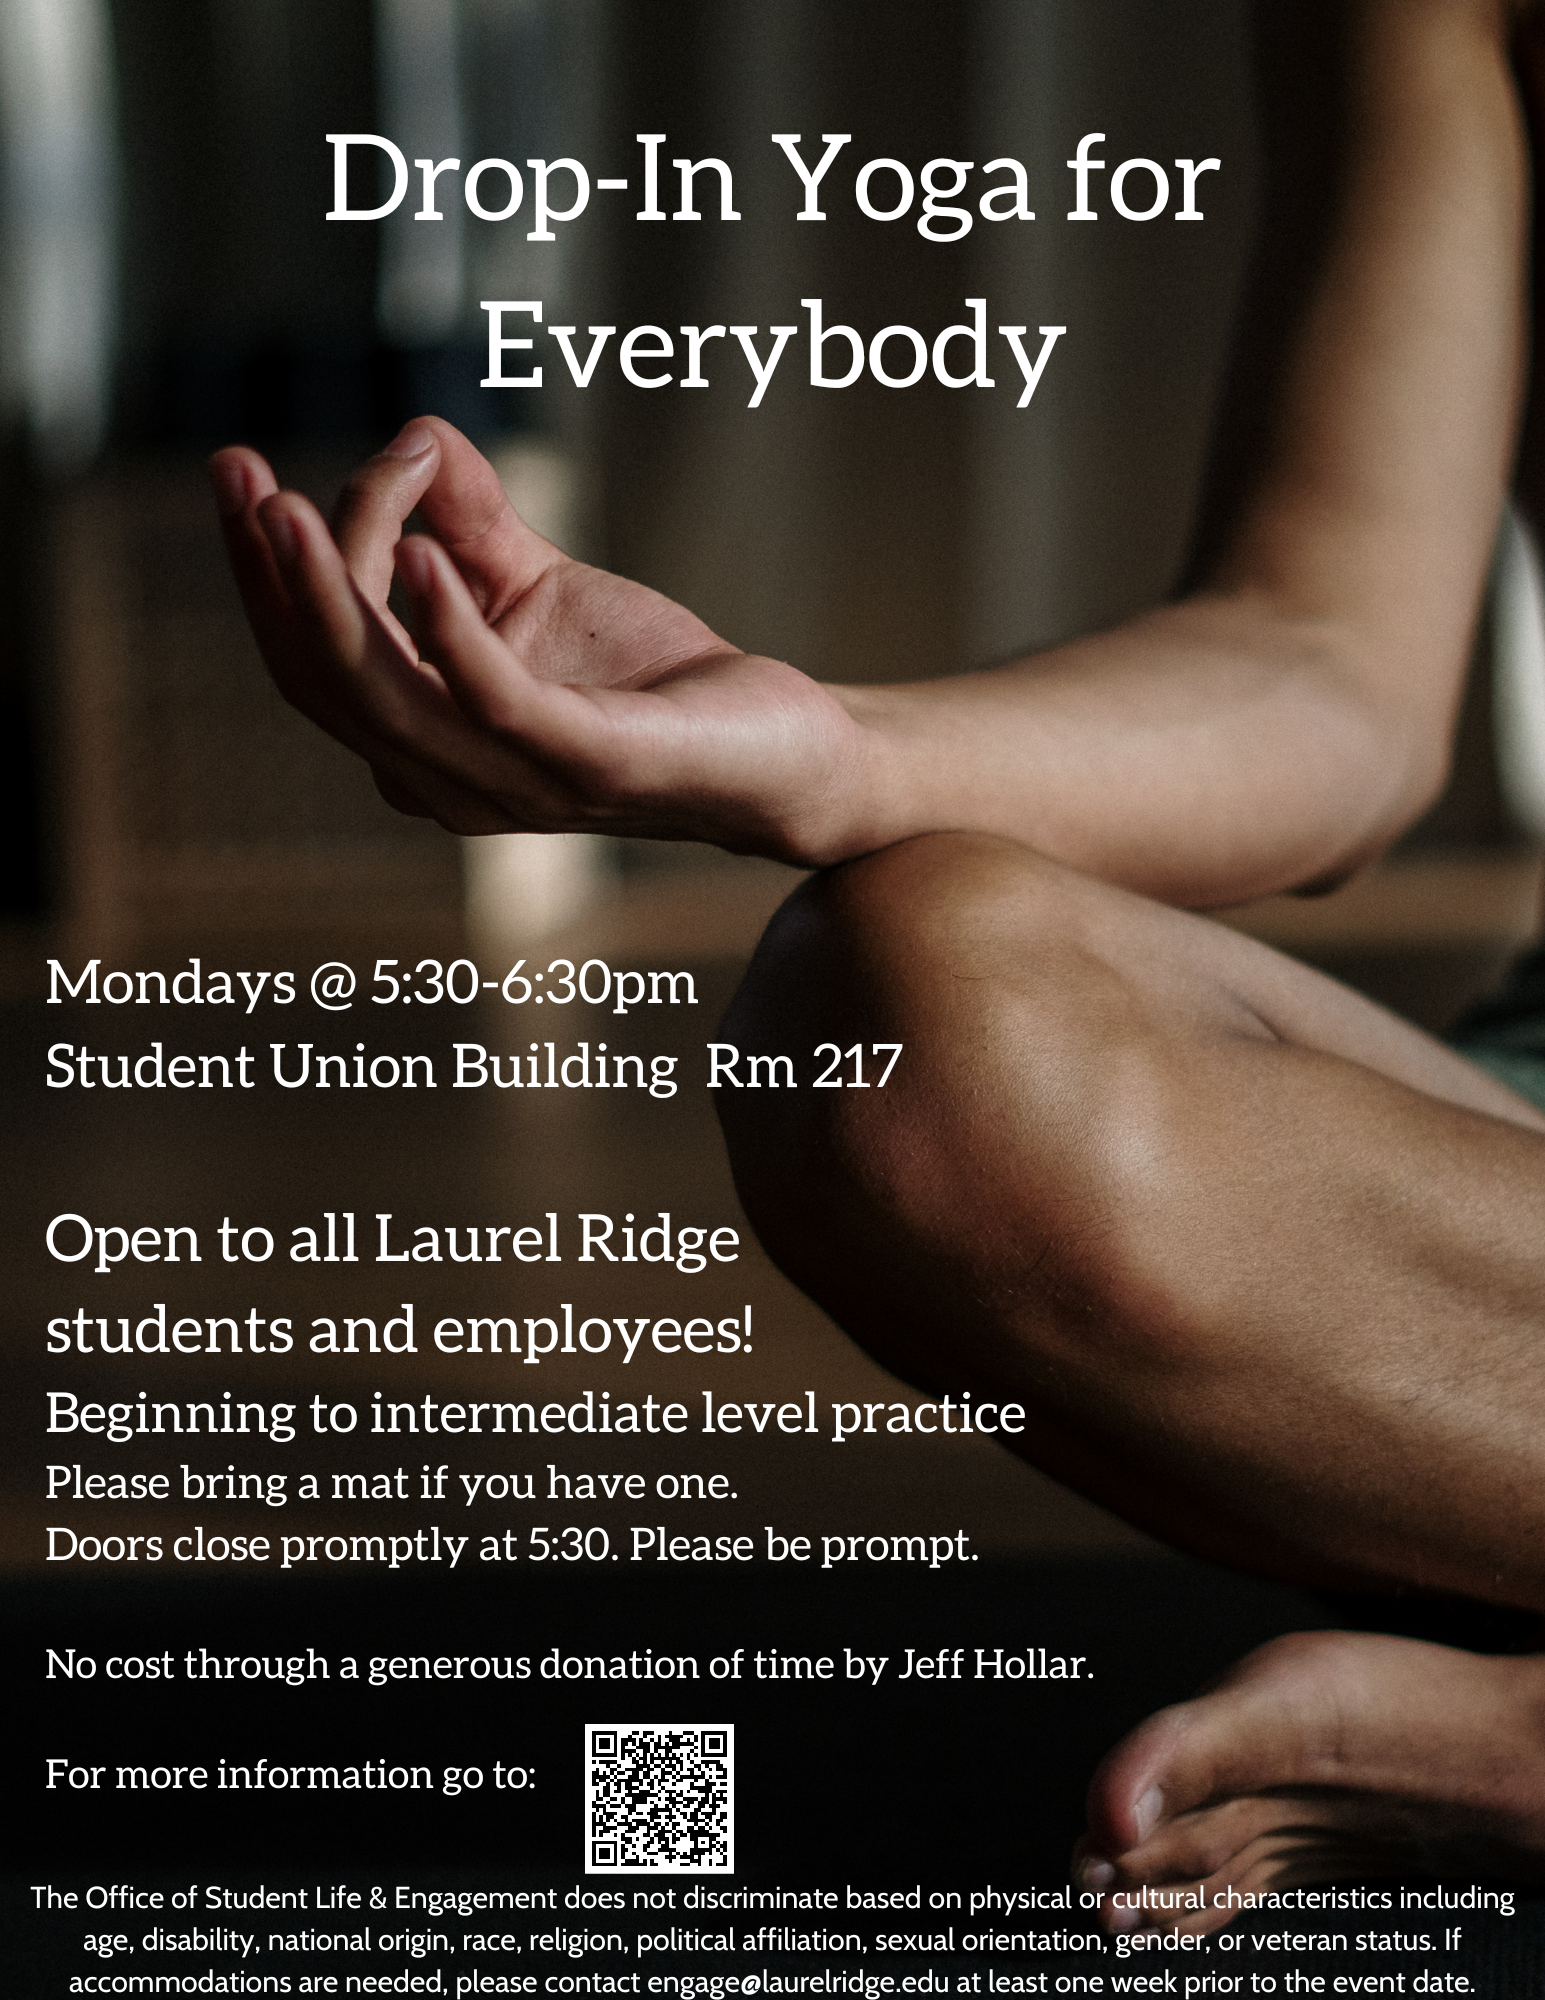 Drop-In Yoga for Everybody flyer